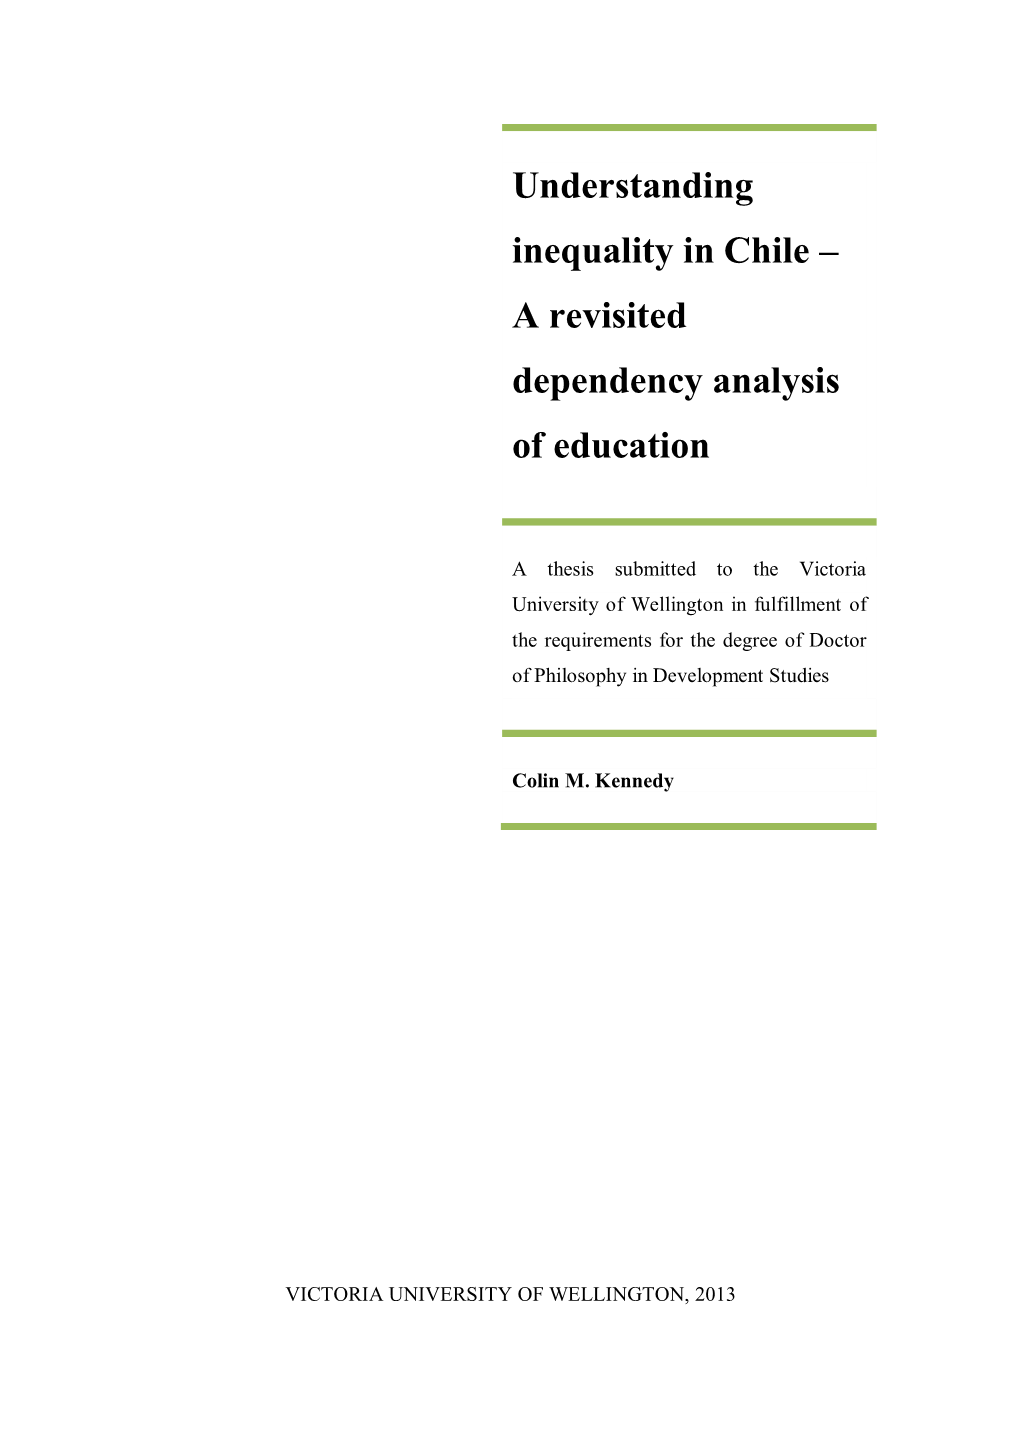 Understanding Inequality in Chile – a Revisited Dependency Analysis Of